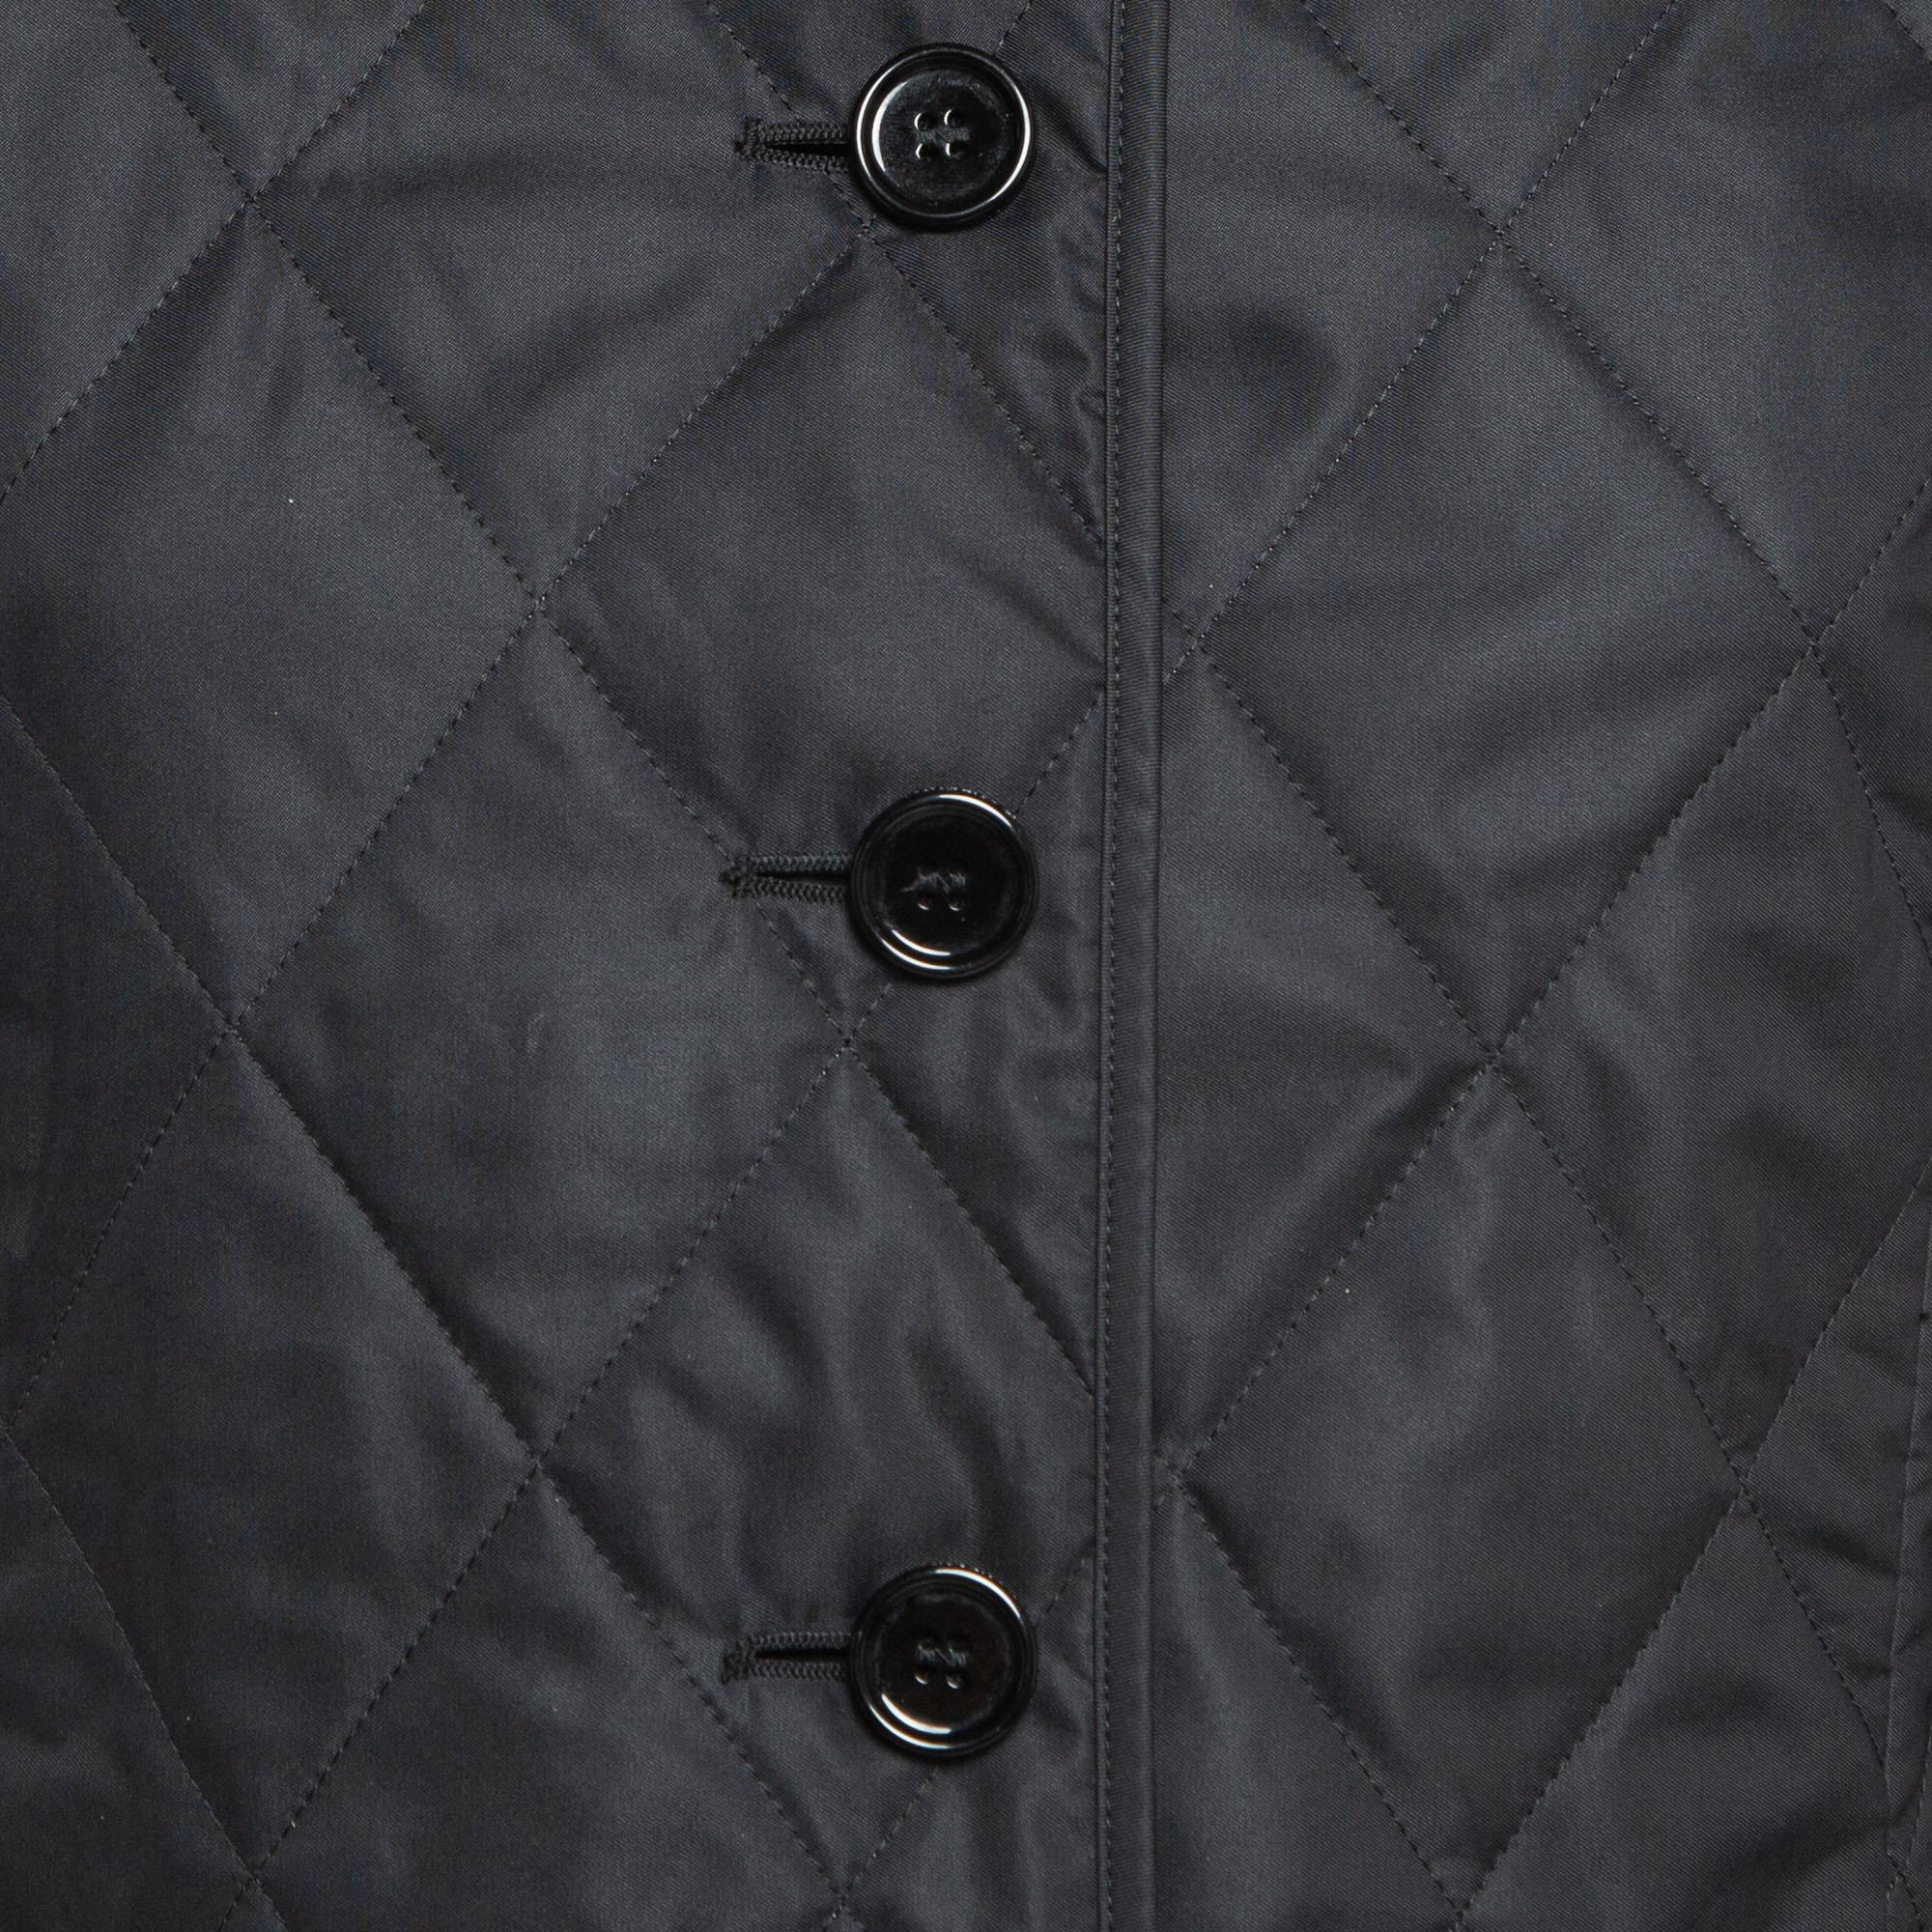 Burberry Black Synthetic Diamond Quilted Thermoregulated Jacket S 1